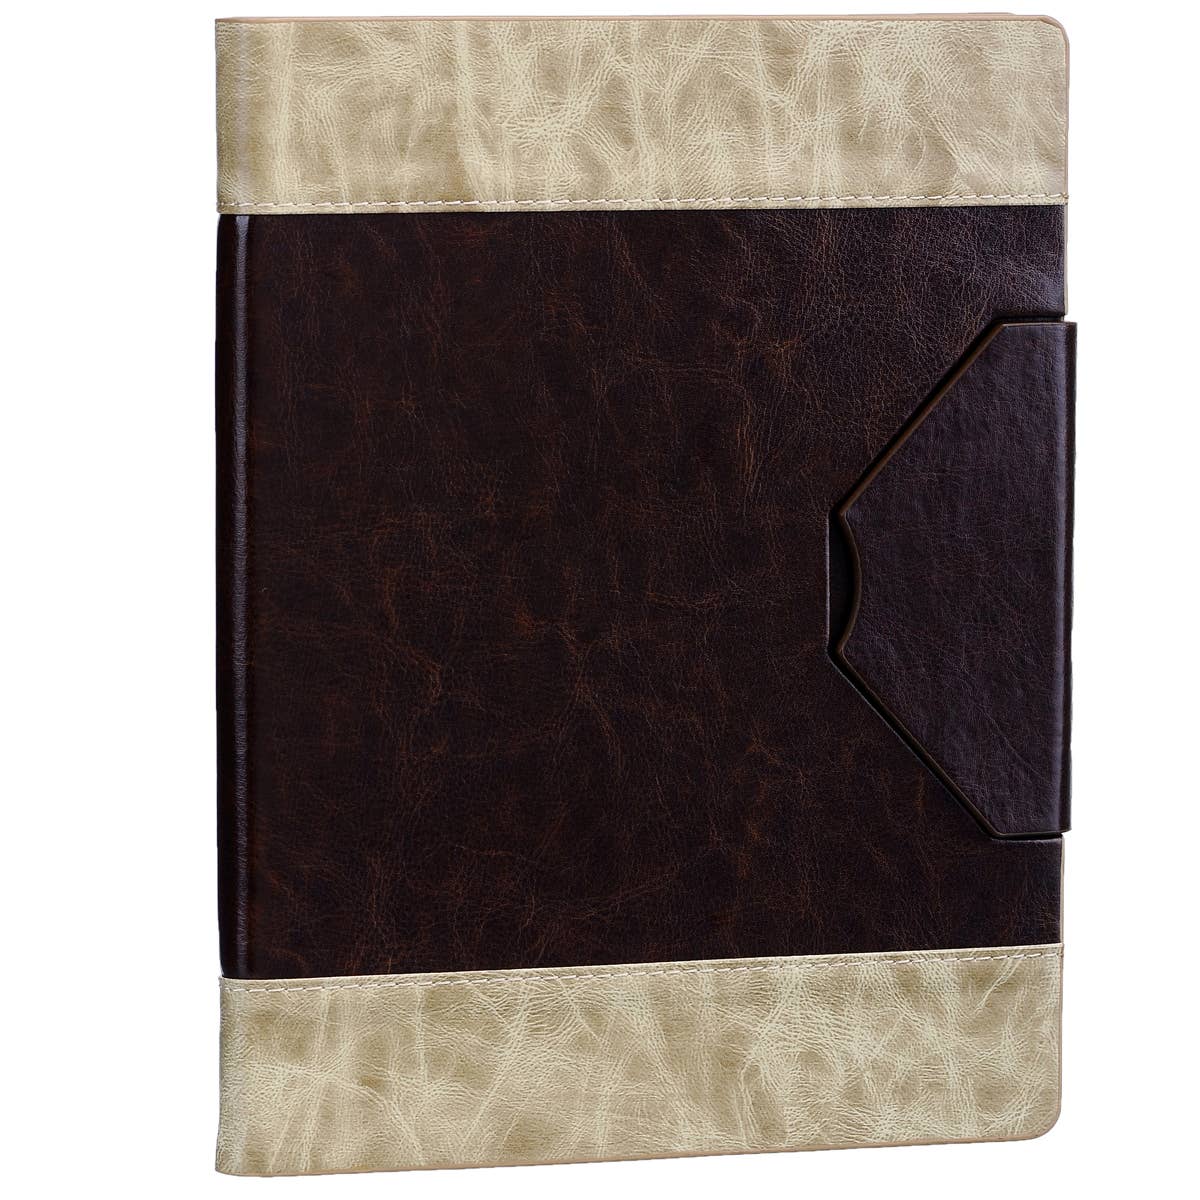 Cream and Brown iPad Cover